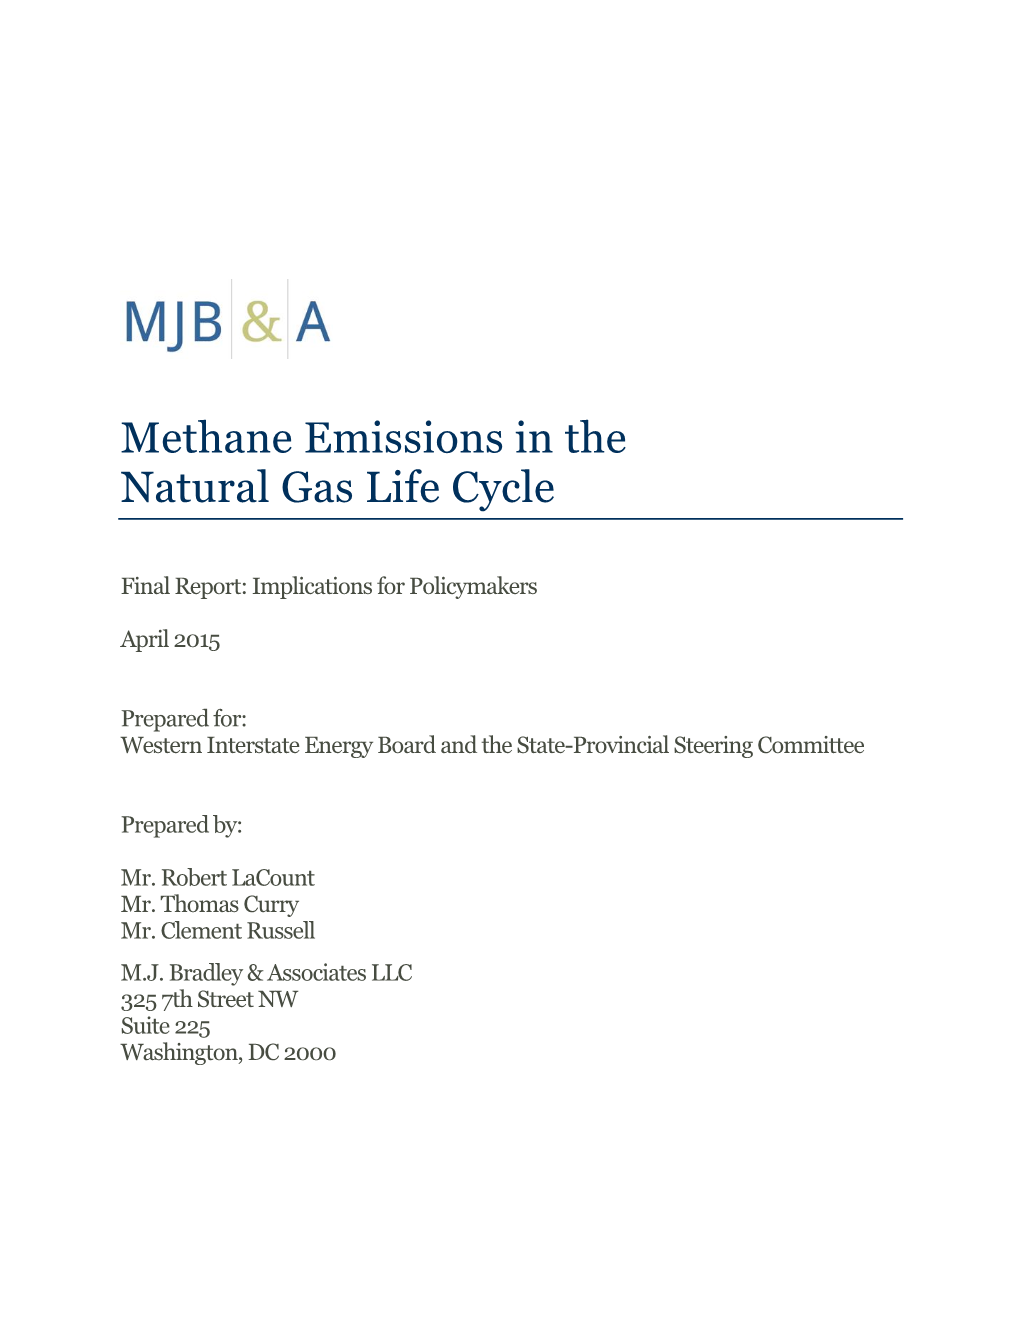 Methane Emissions in the Natural Gas Life Cycle